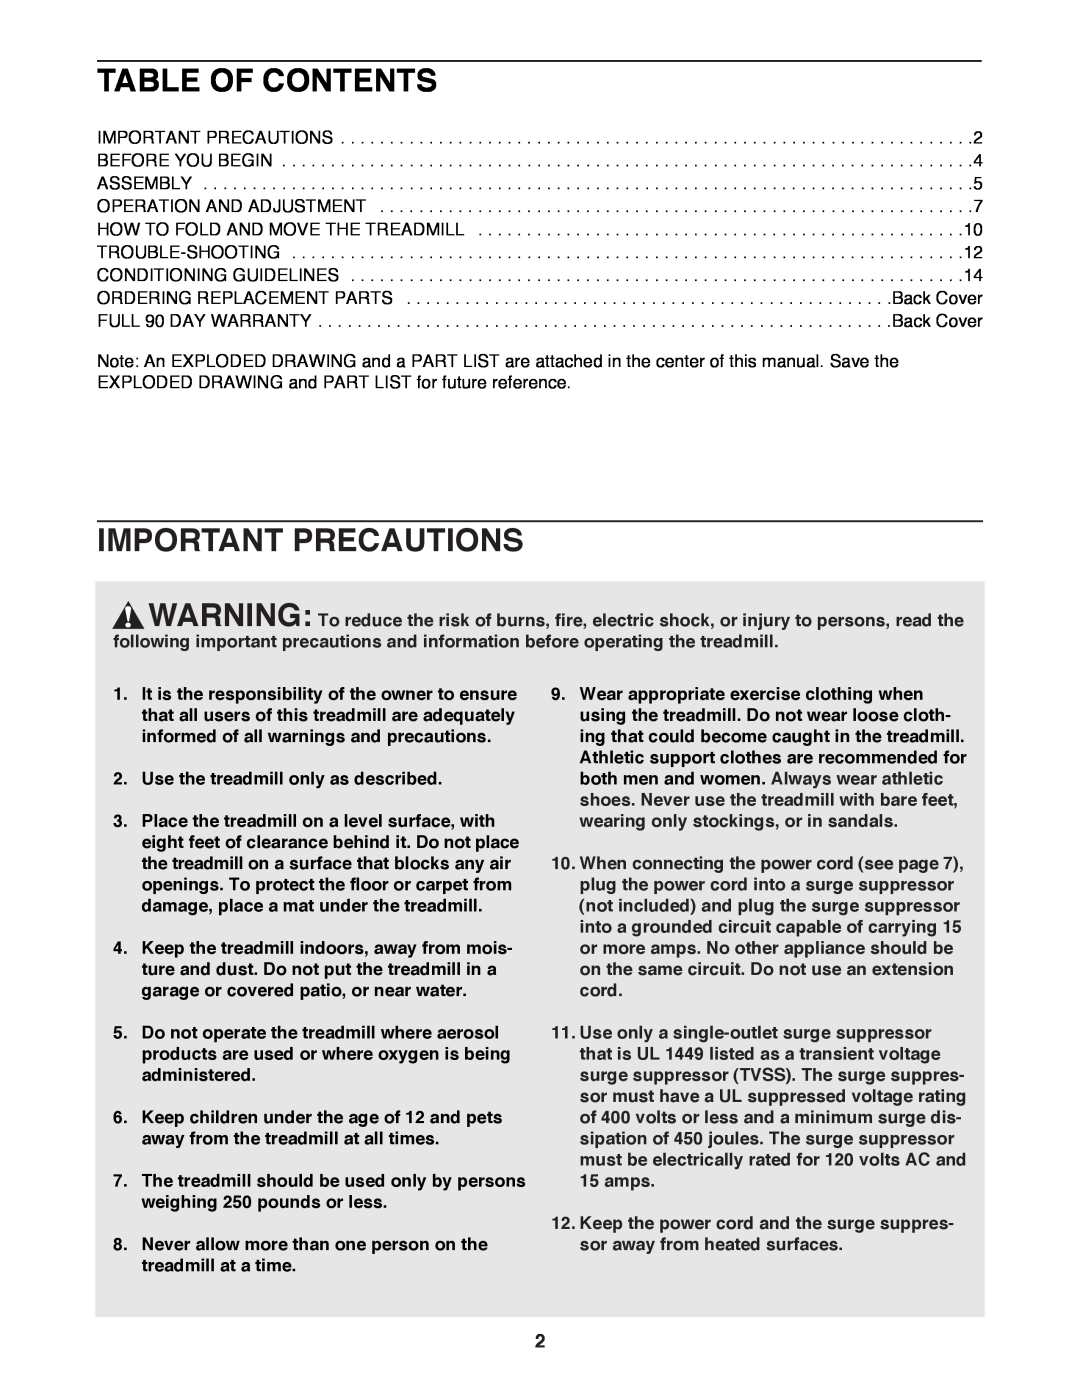 ProForm 831.298061 user manual Table Of Contents, Important Precautions, Use the treadmill only as described 